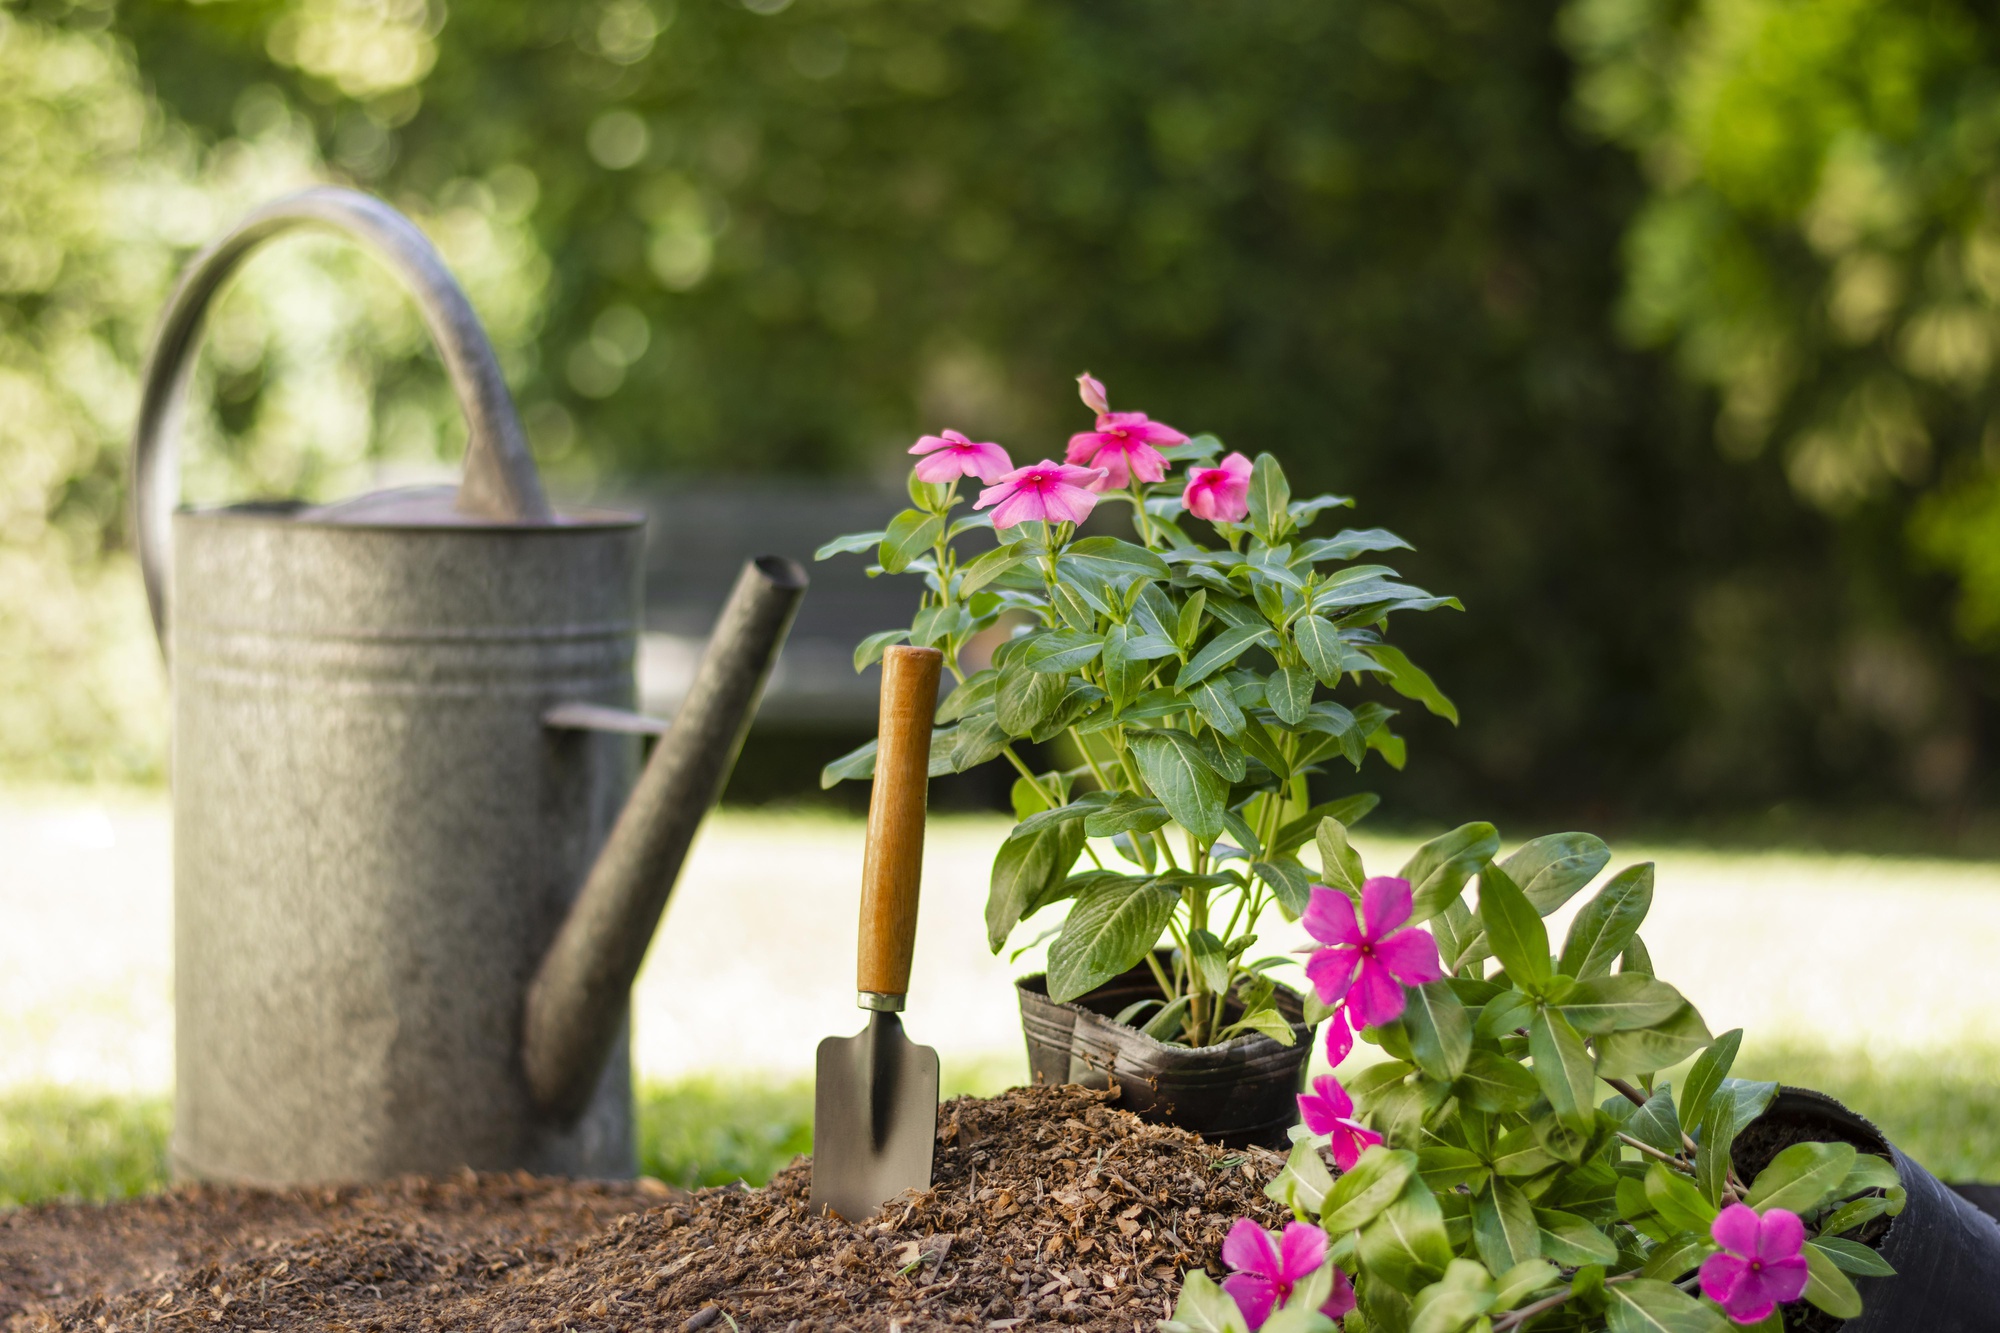 How To Start Square Foot Gardening: Everything You Need To Know